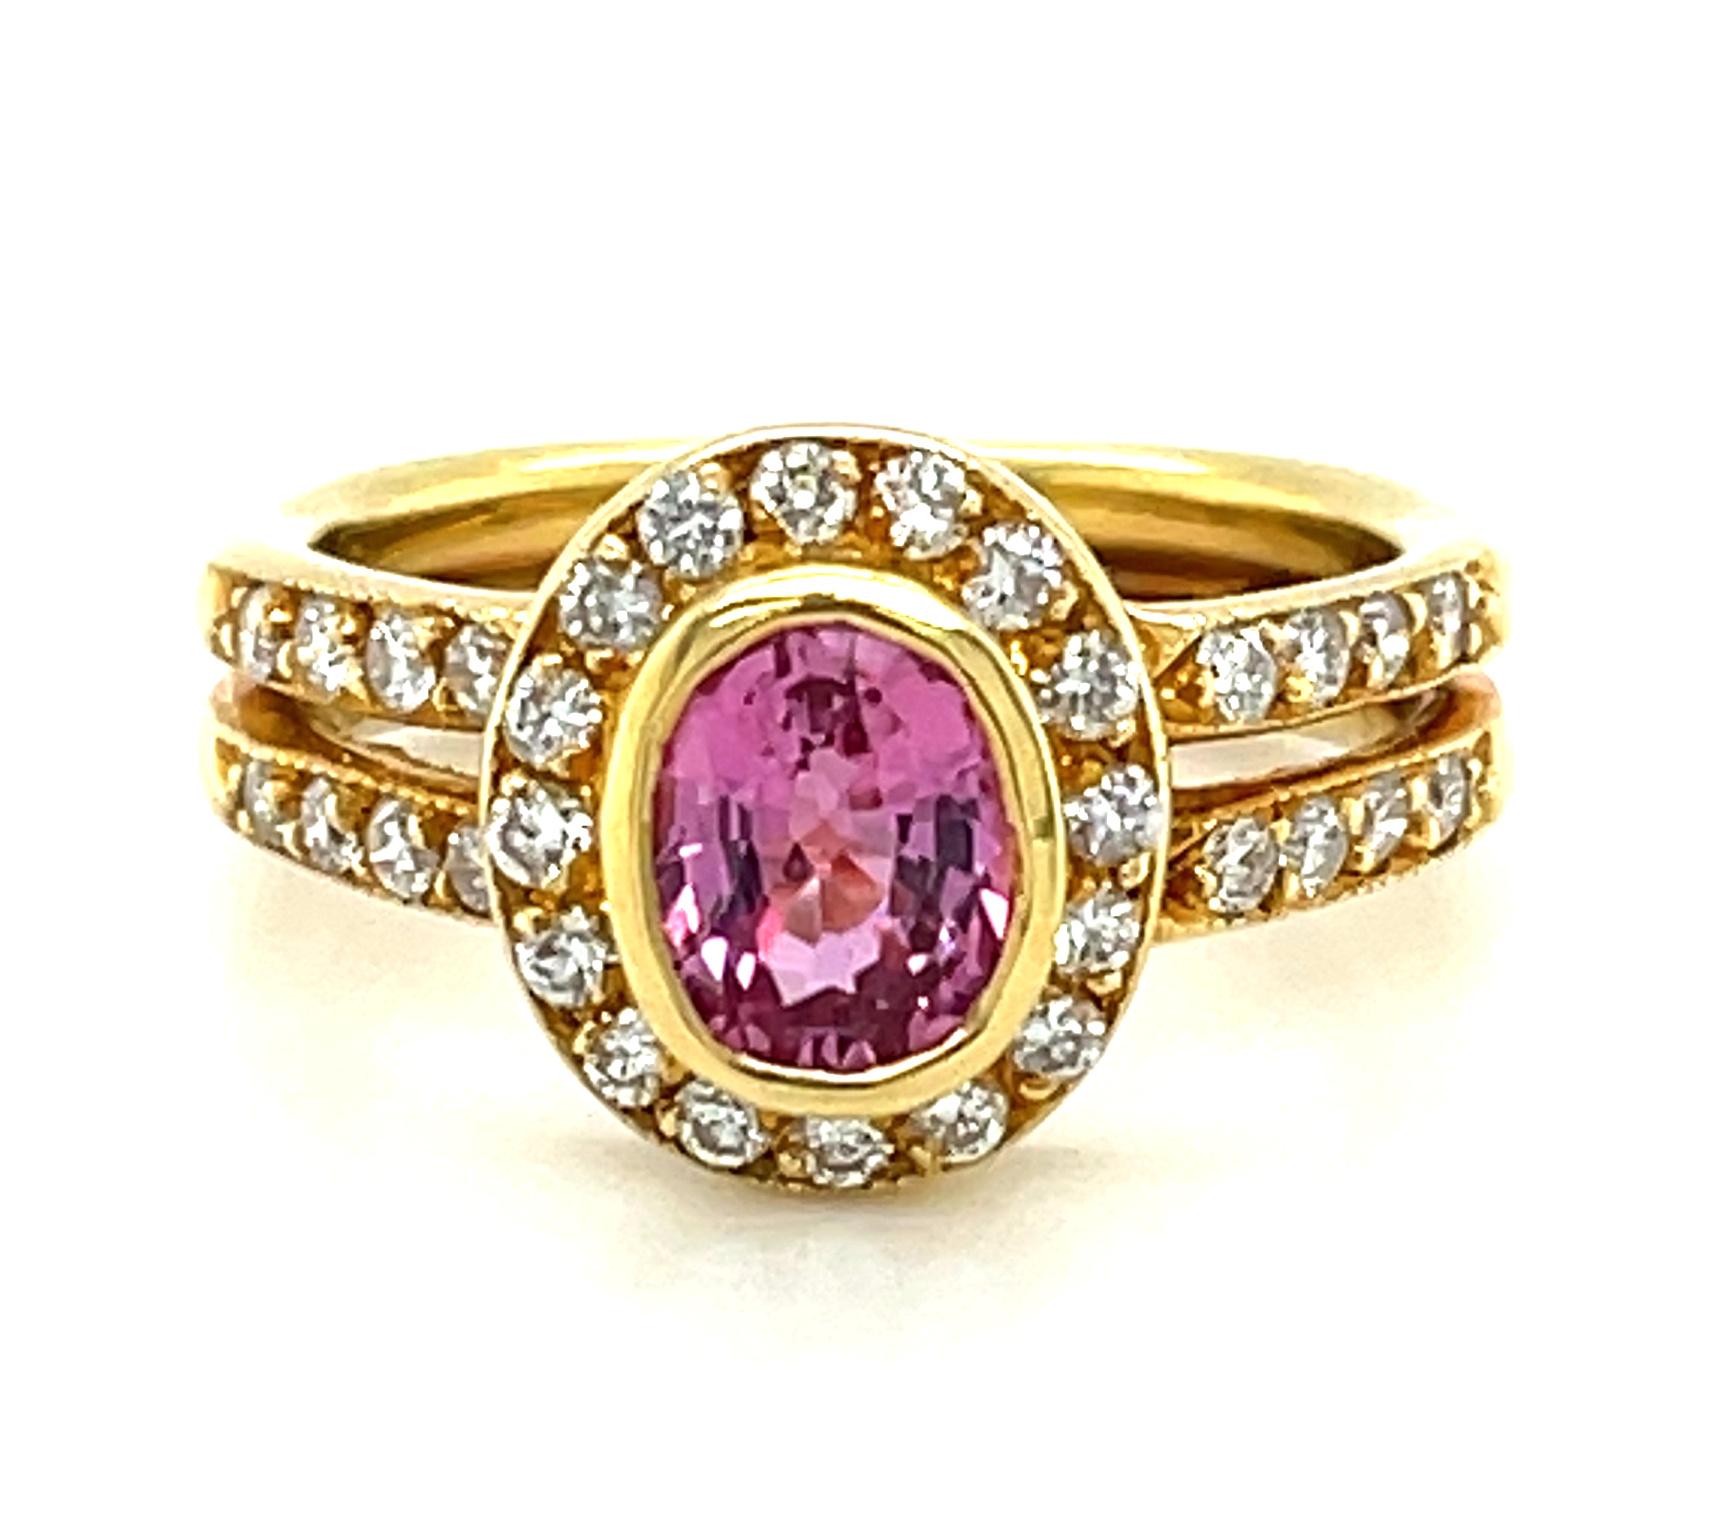 Women's 1.14 Carat Pink Sapphire and Diamond Halo Engagement Ring in 18k Gold For Sale